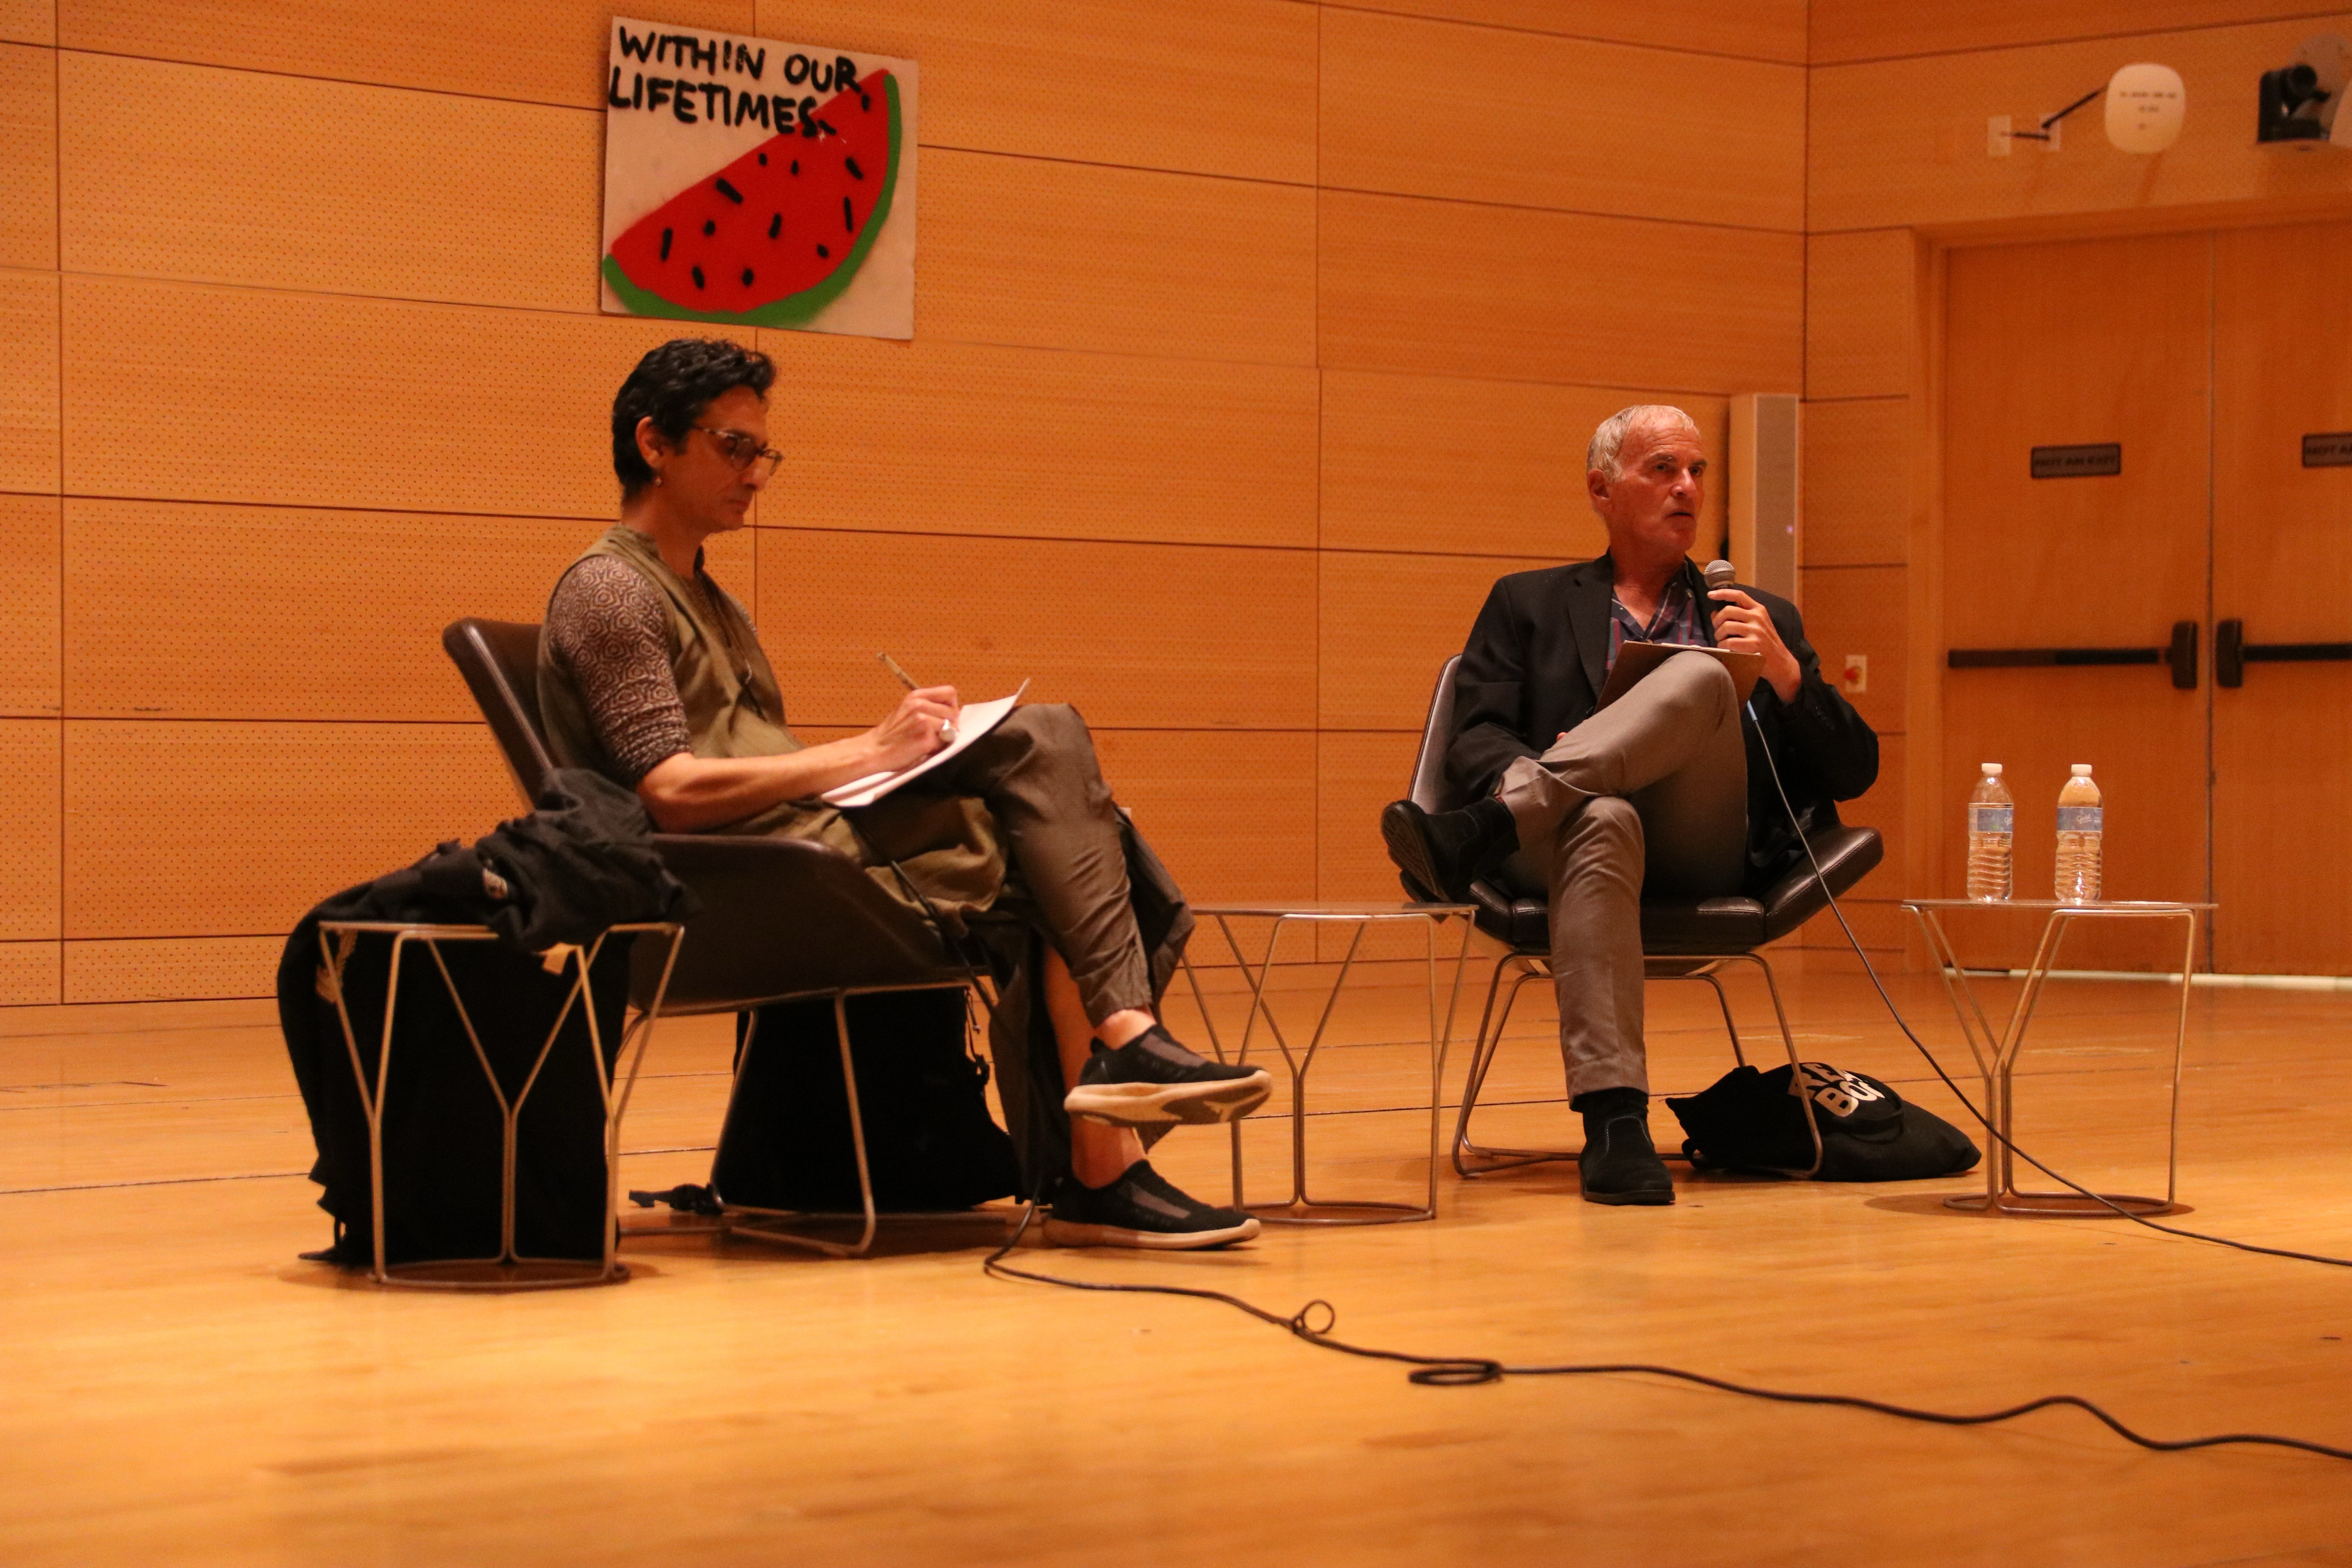 Abou Farman and Norman Finkelstein seated on chairs on the stage at Tishman Auditorium in the University Center.